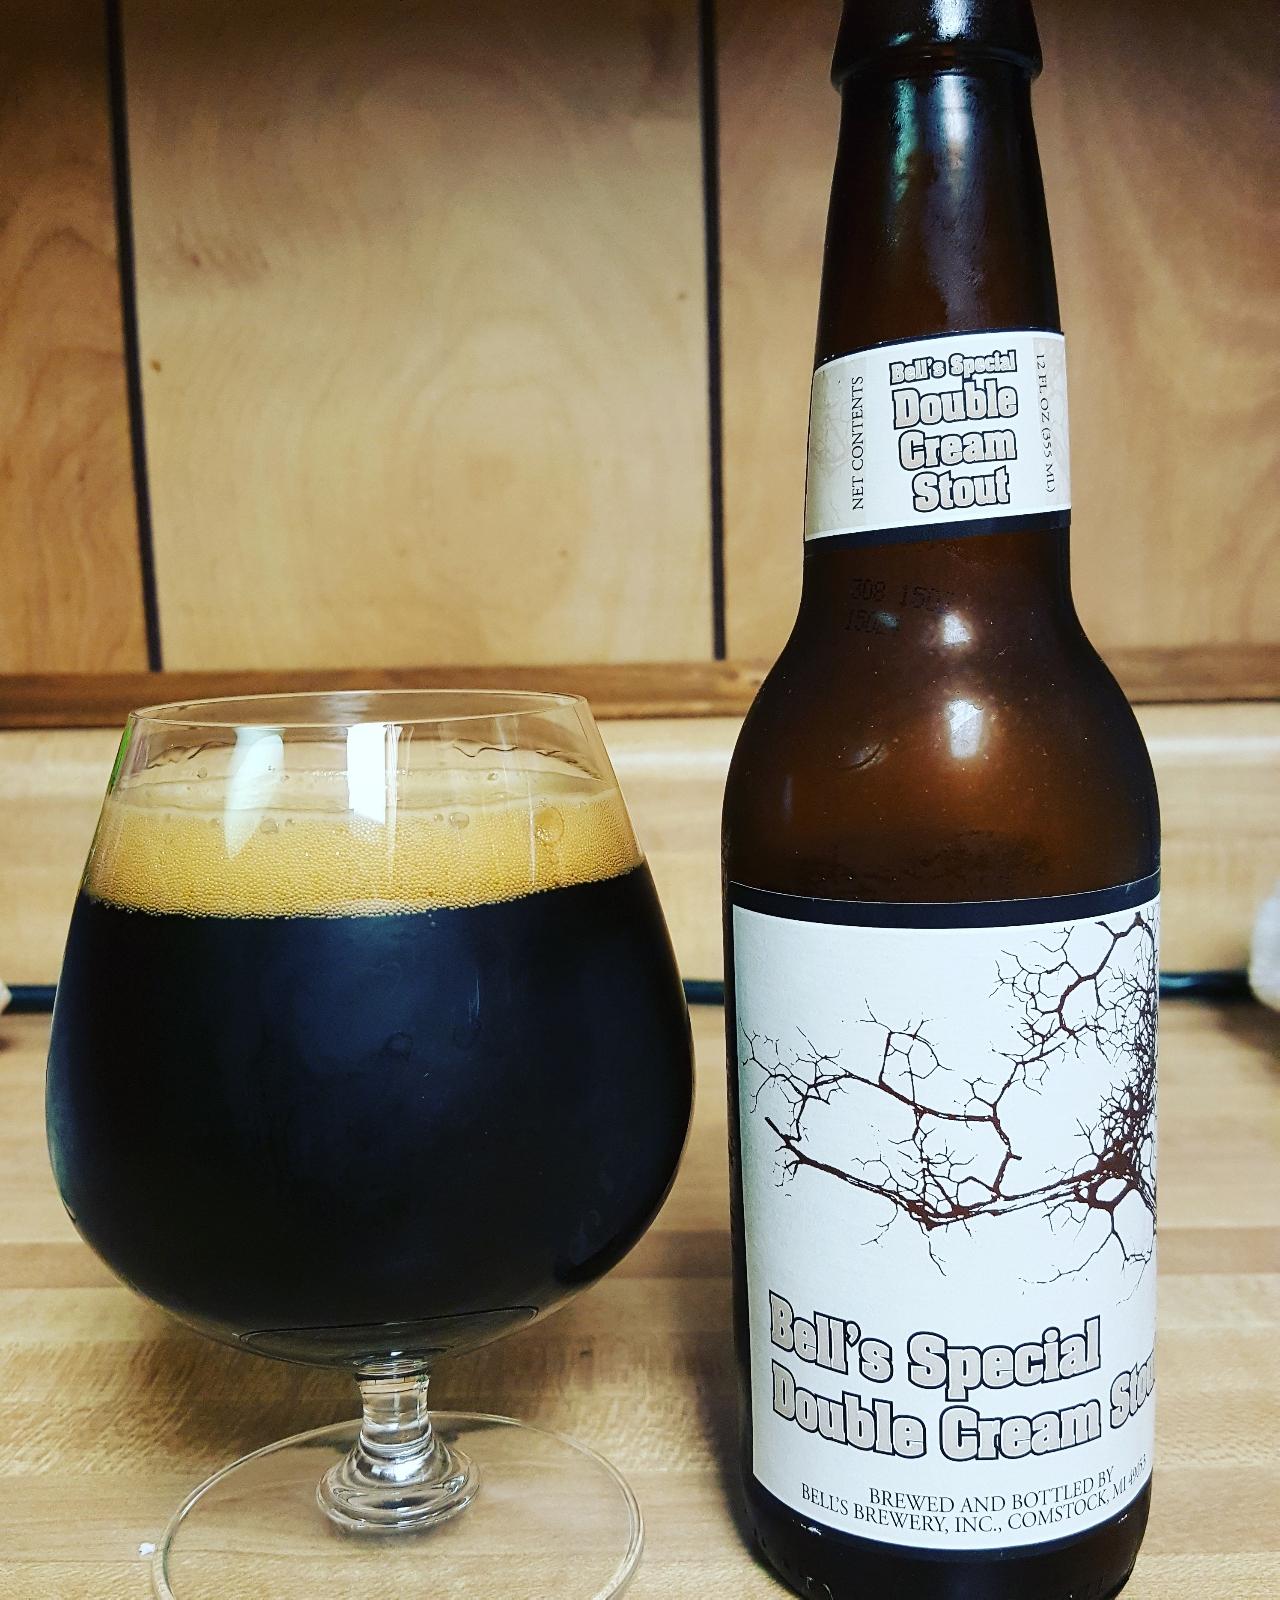 Special Double Cream Stout